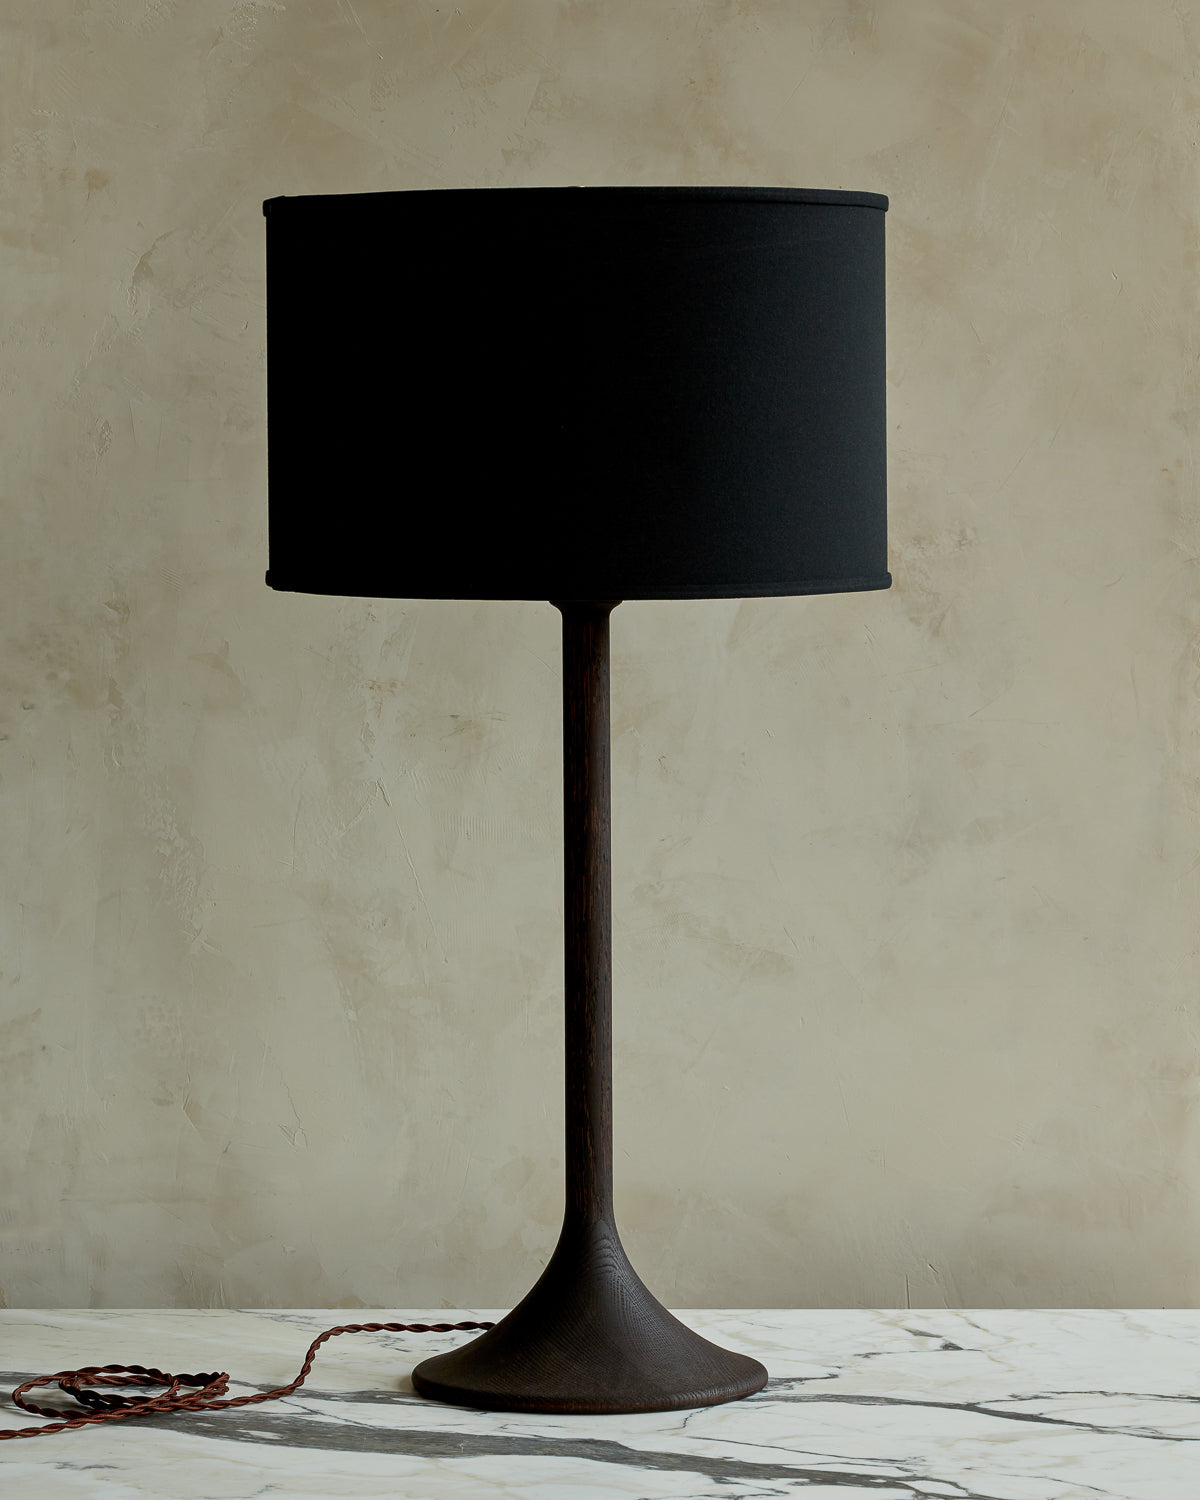 Large Trumpet table lamp with dark wash finish and black drum shade